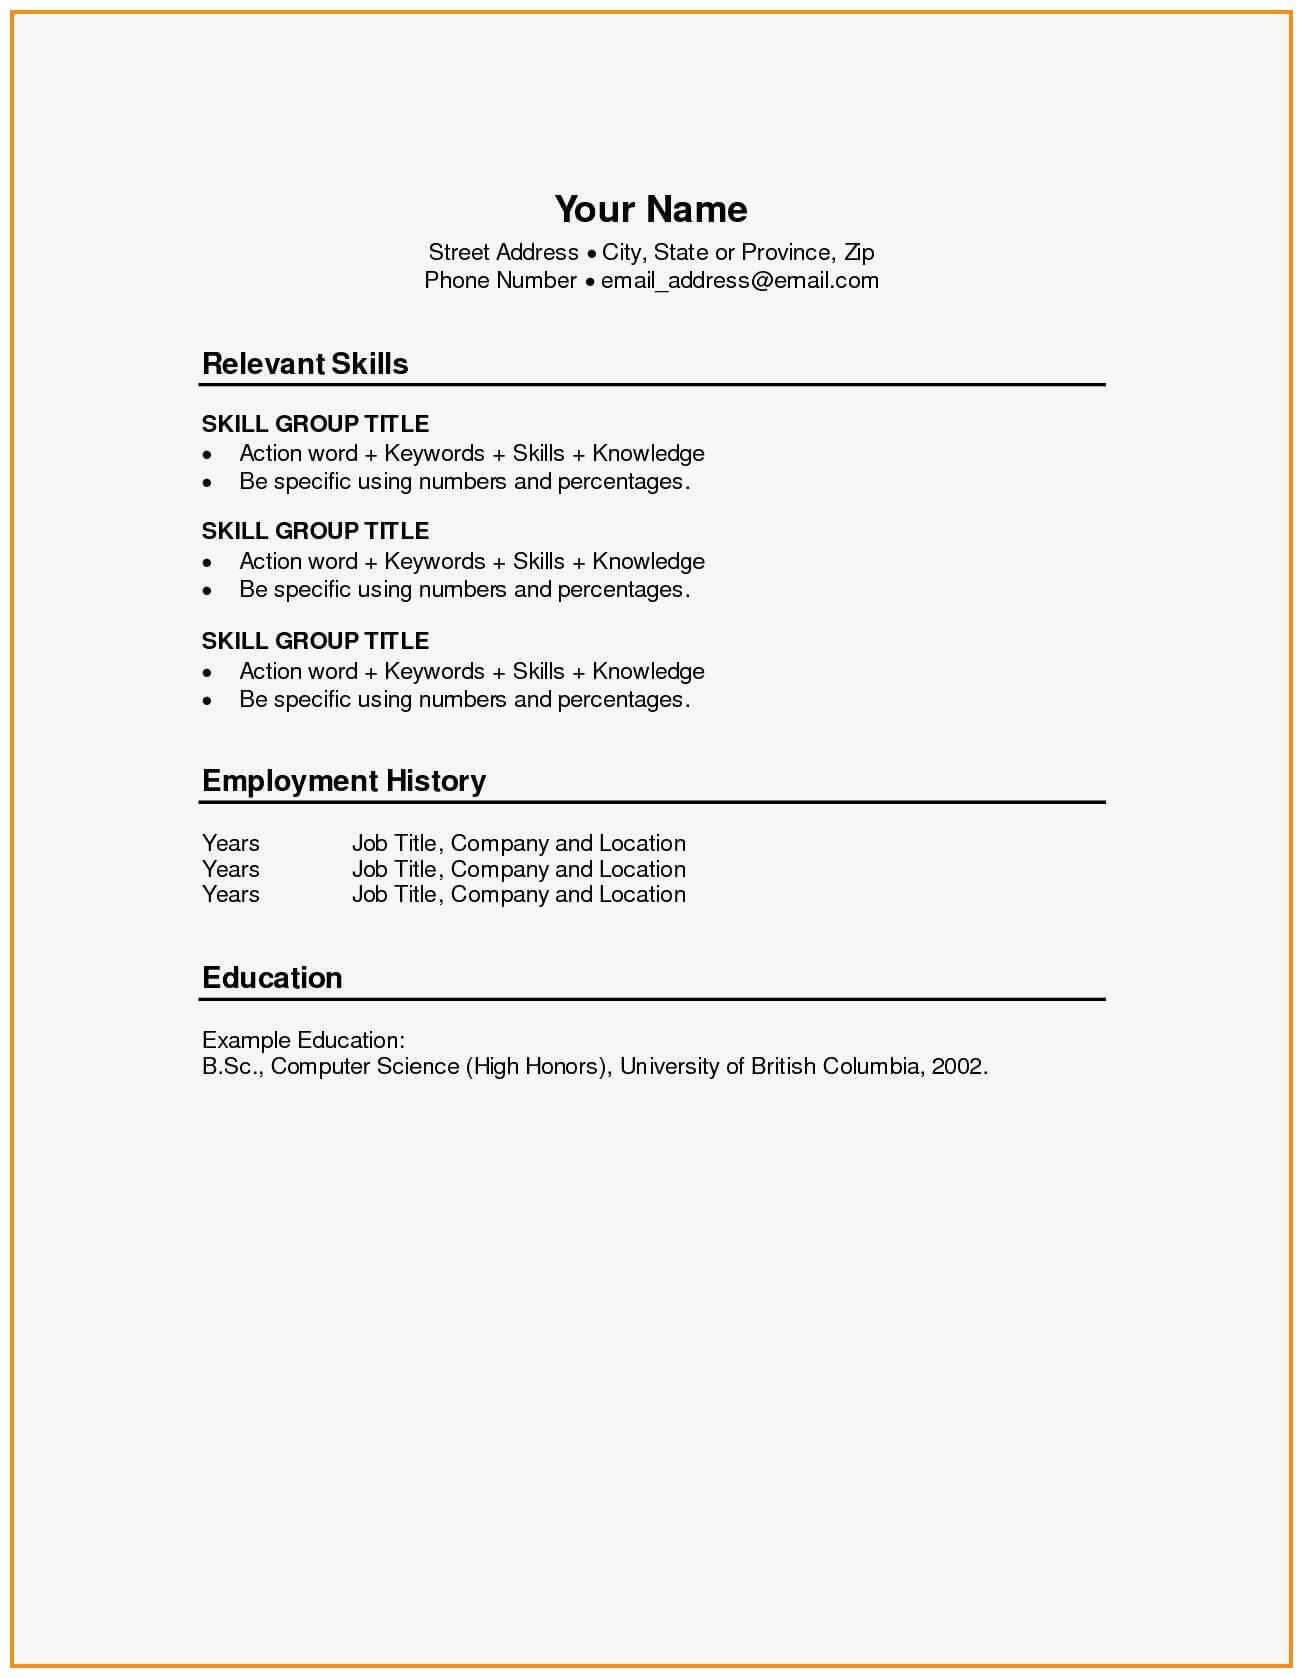 Word 2007 Resume Templates Admirably College Resume Template Inside Word 2010 Template Location